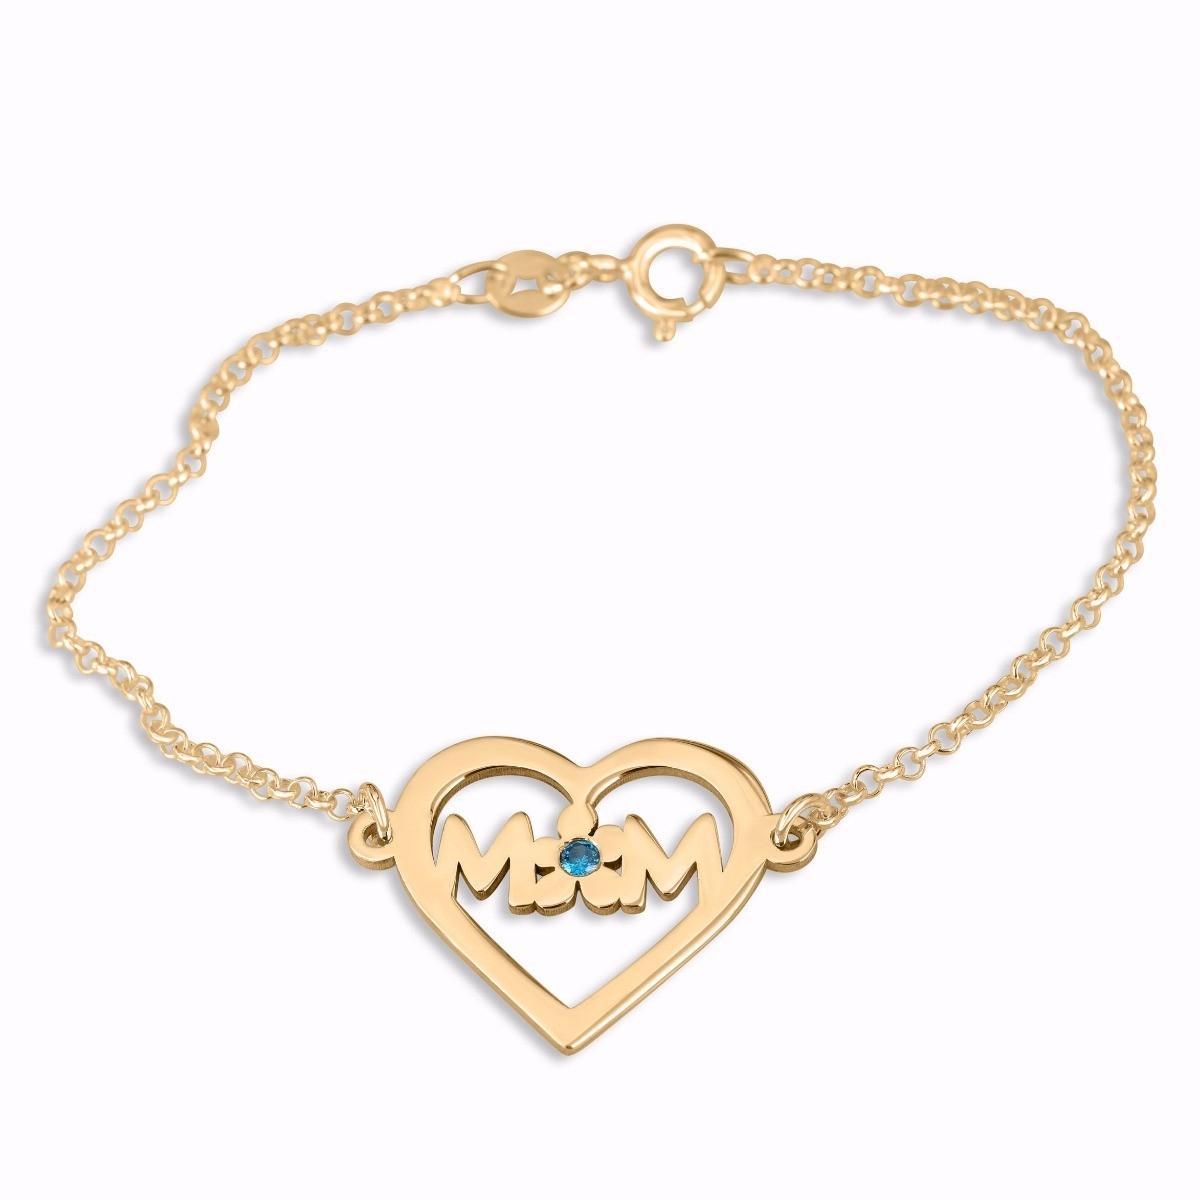 Double Thickness Gold-Plated Double Initials Heart and Flower Bracelet with Birthstone - 1